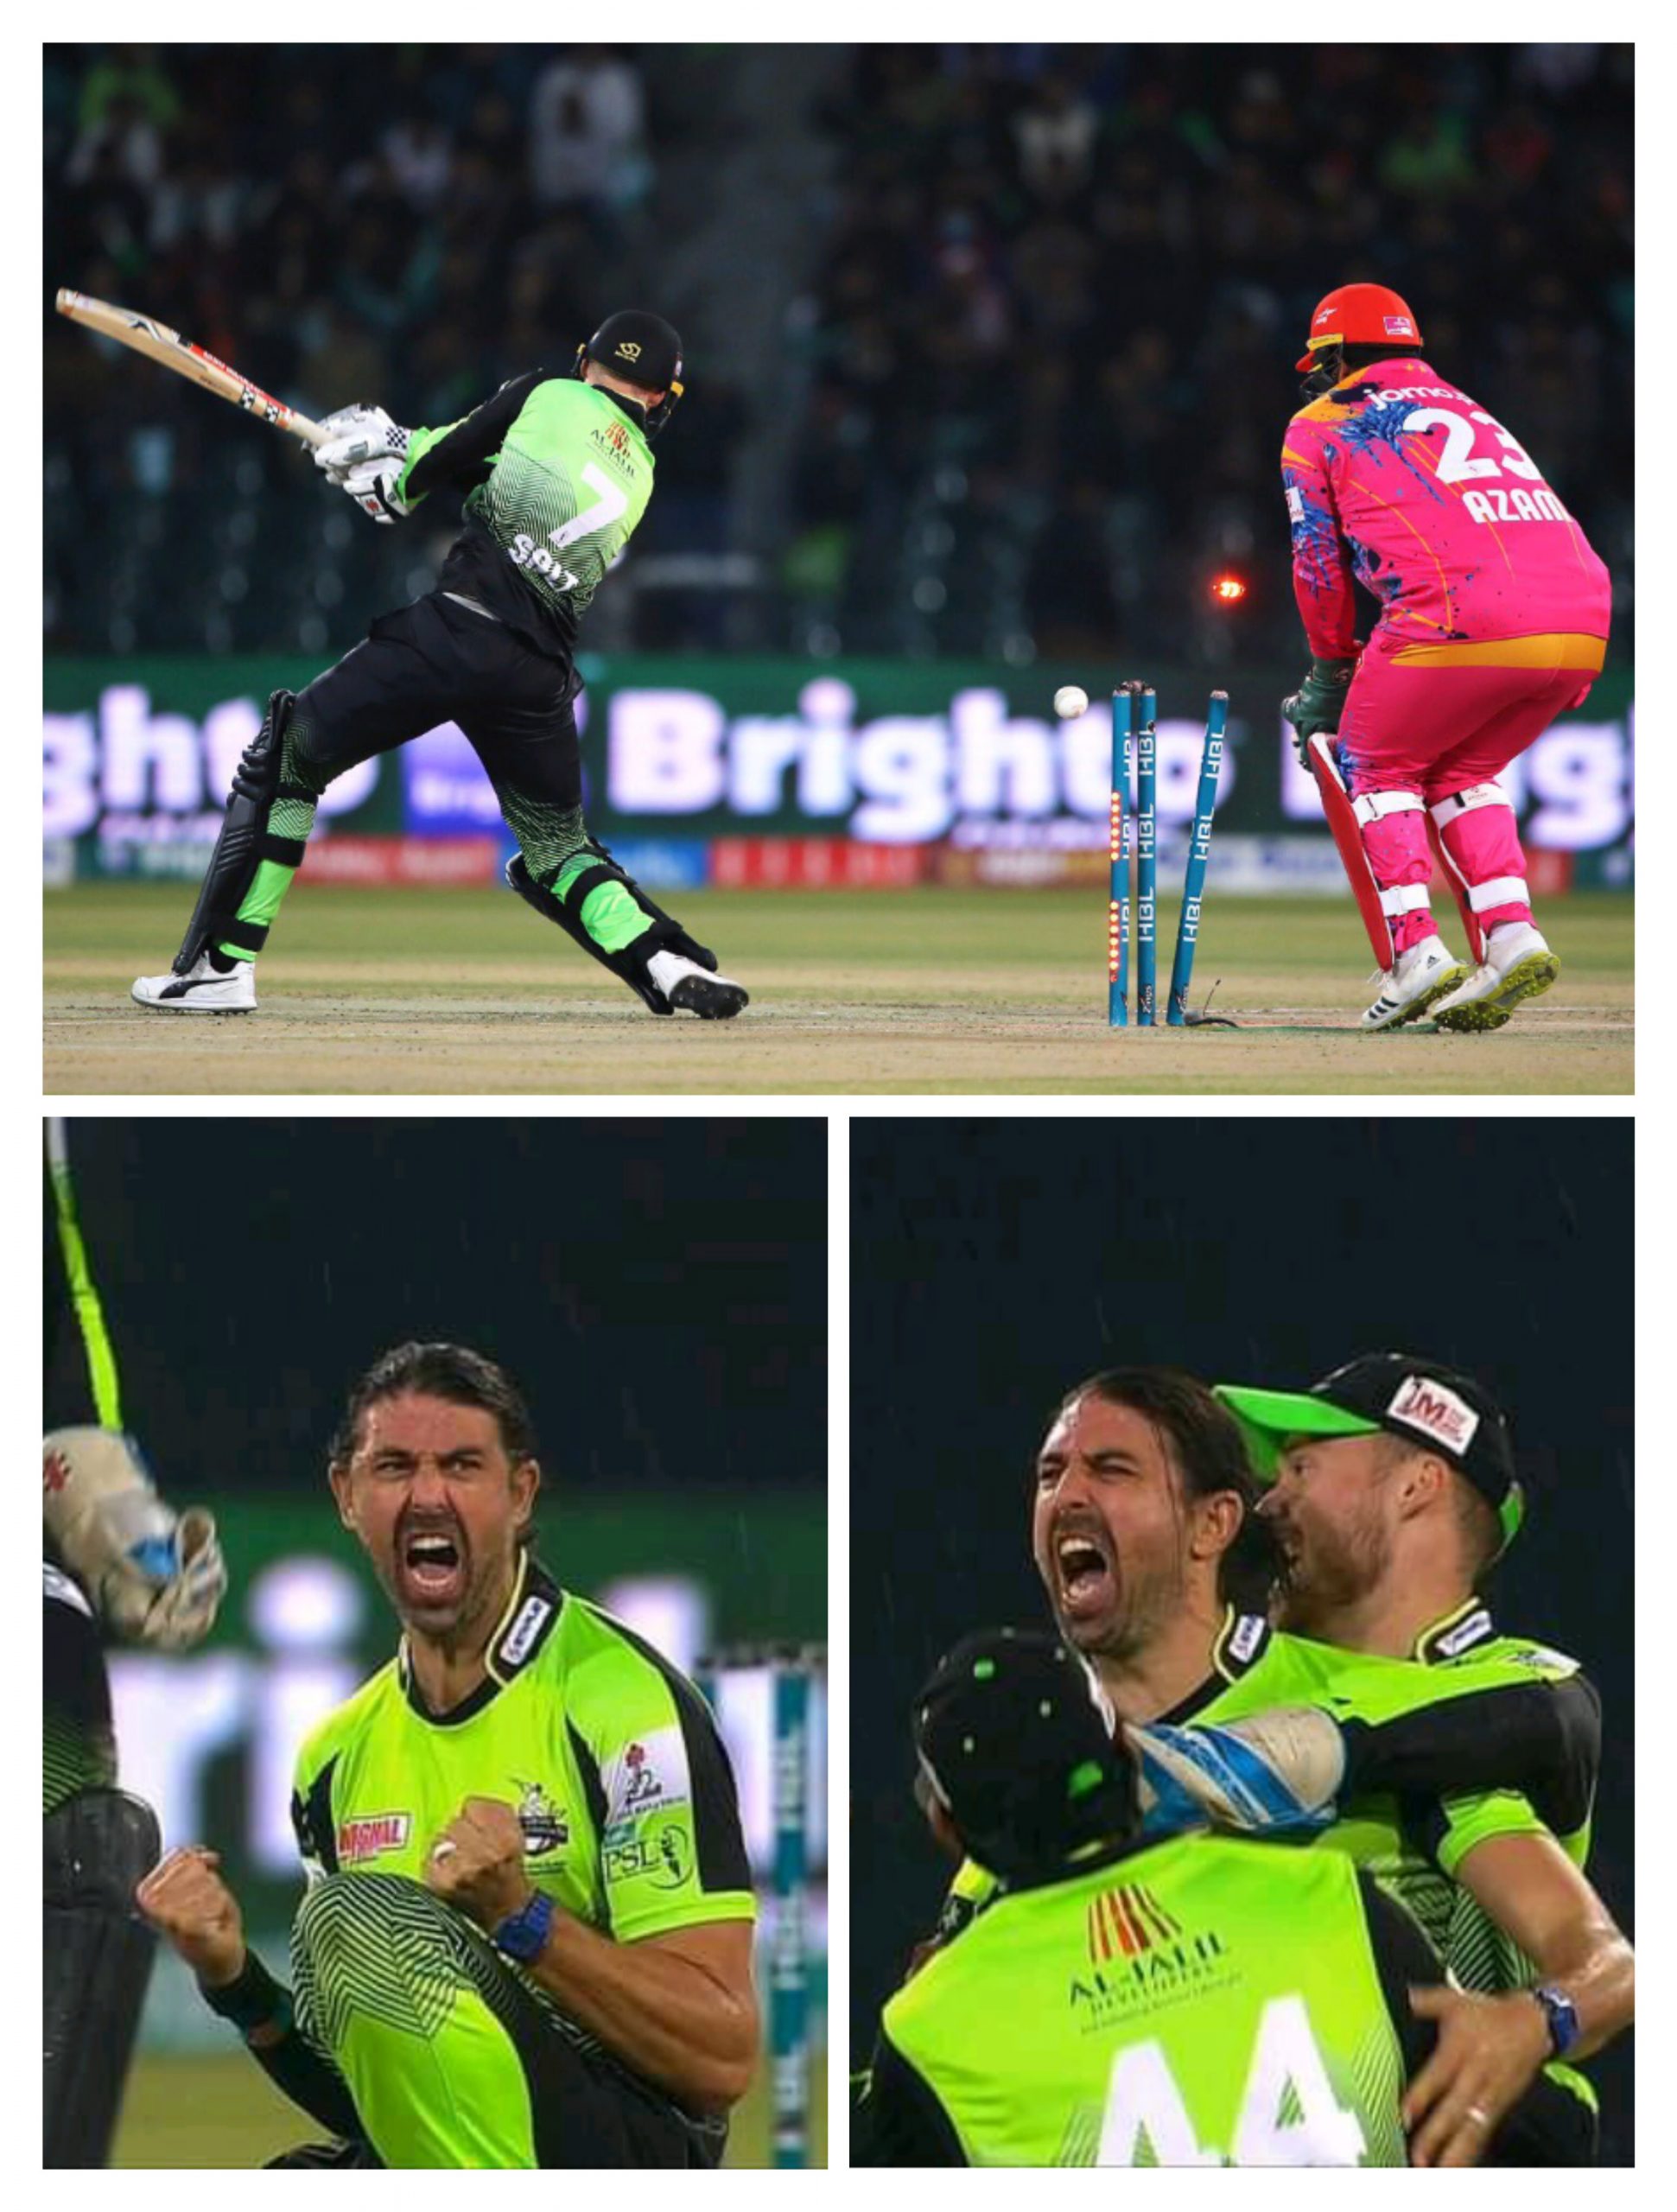 PSL 7 Lahore Qalandars reached the final by defeating Islamabad United.